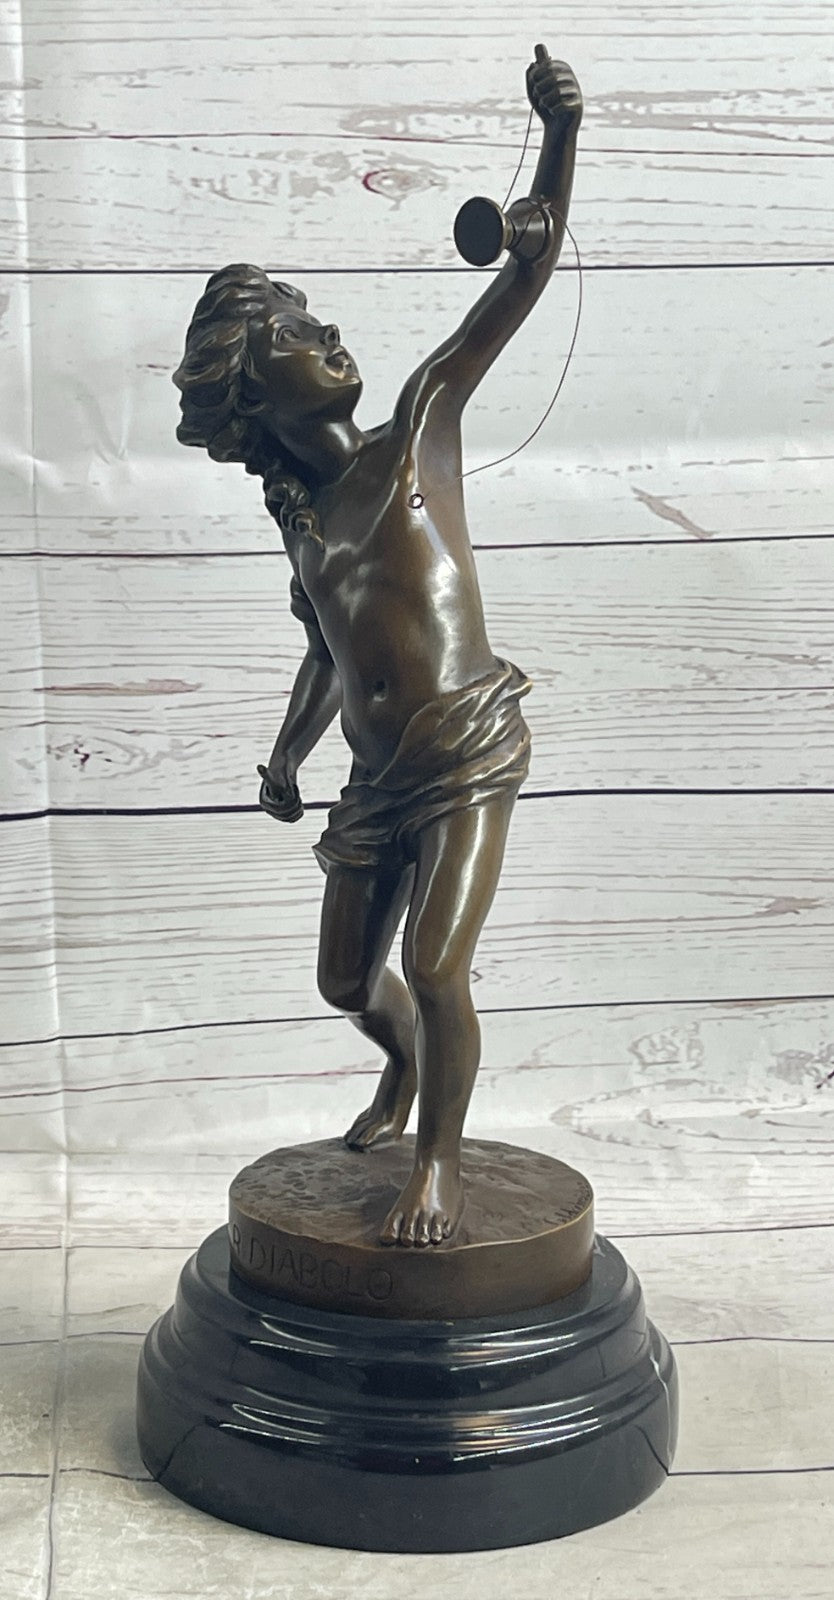 Goldscheider France: Classic Bronze Boy Statue Playing with Yoyo Deal